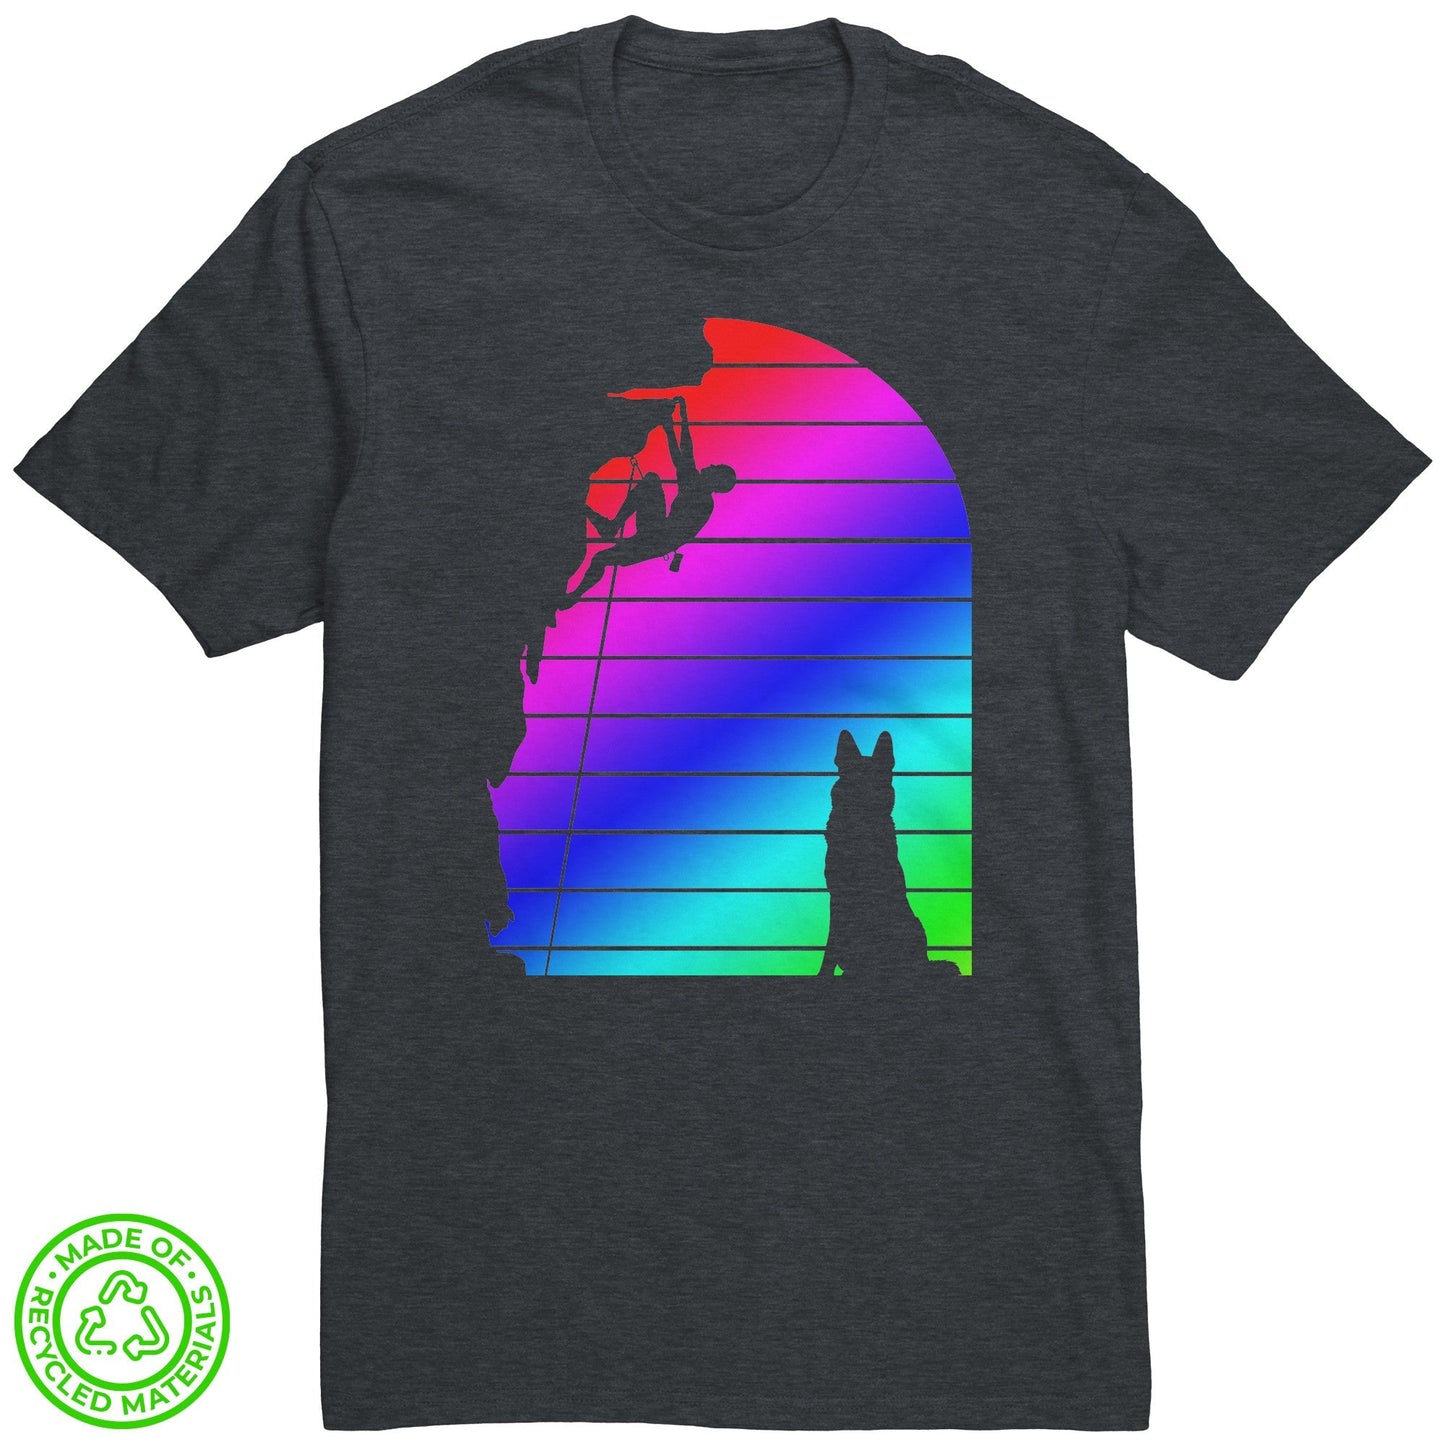 Eco-Friendly Re-Tee (Rainbow Silhouetted climber and shepherd)